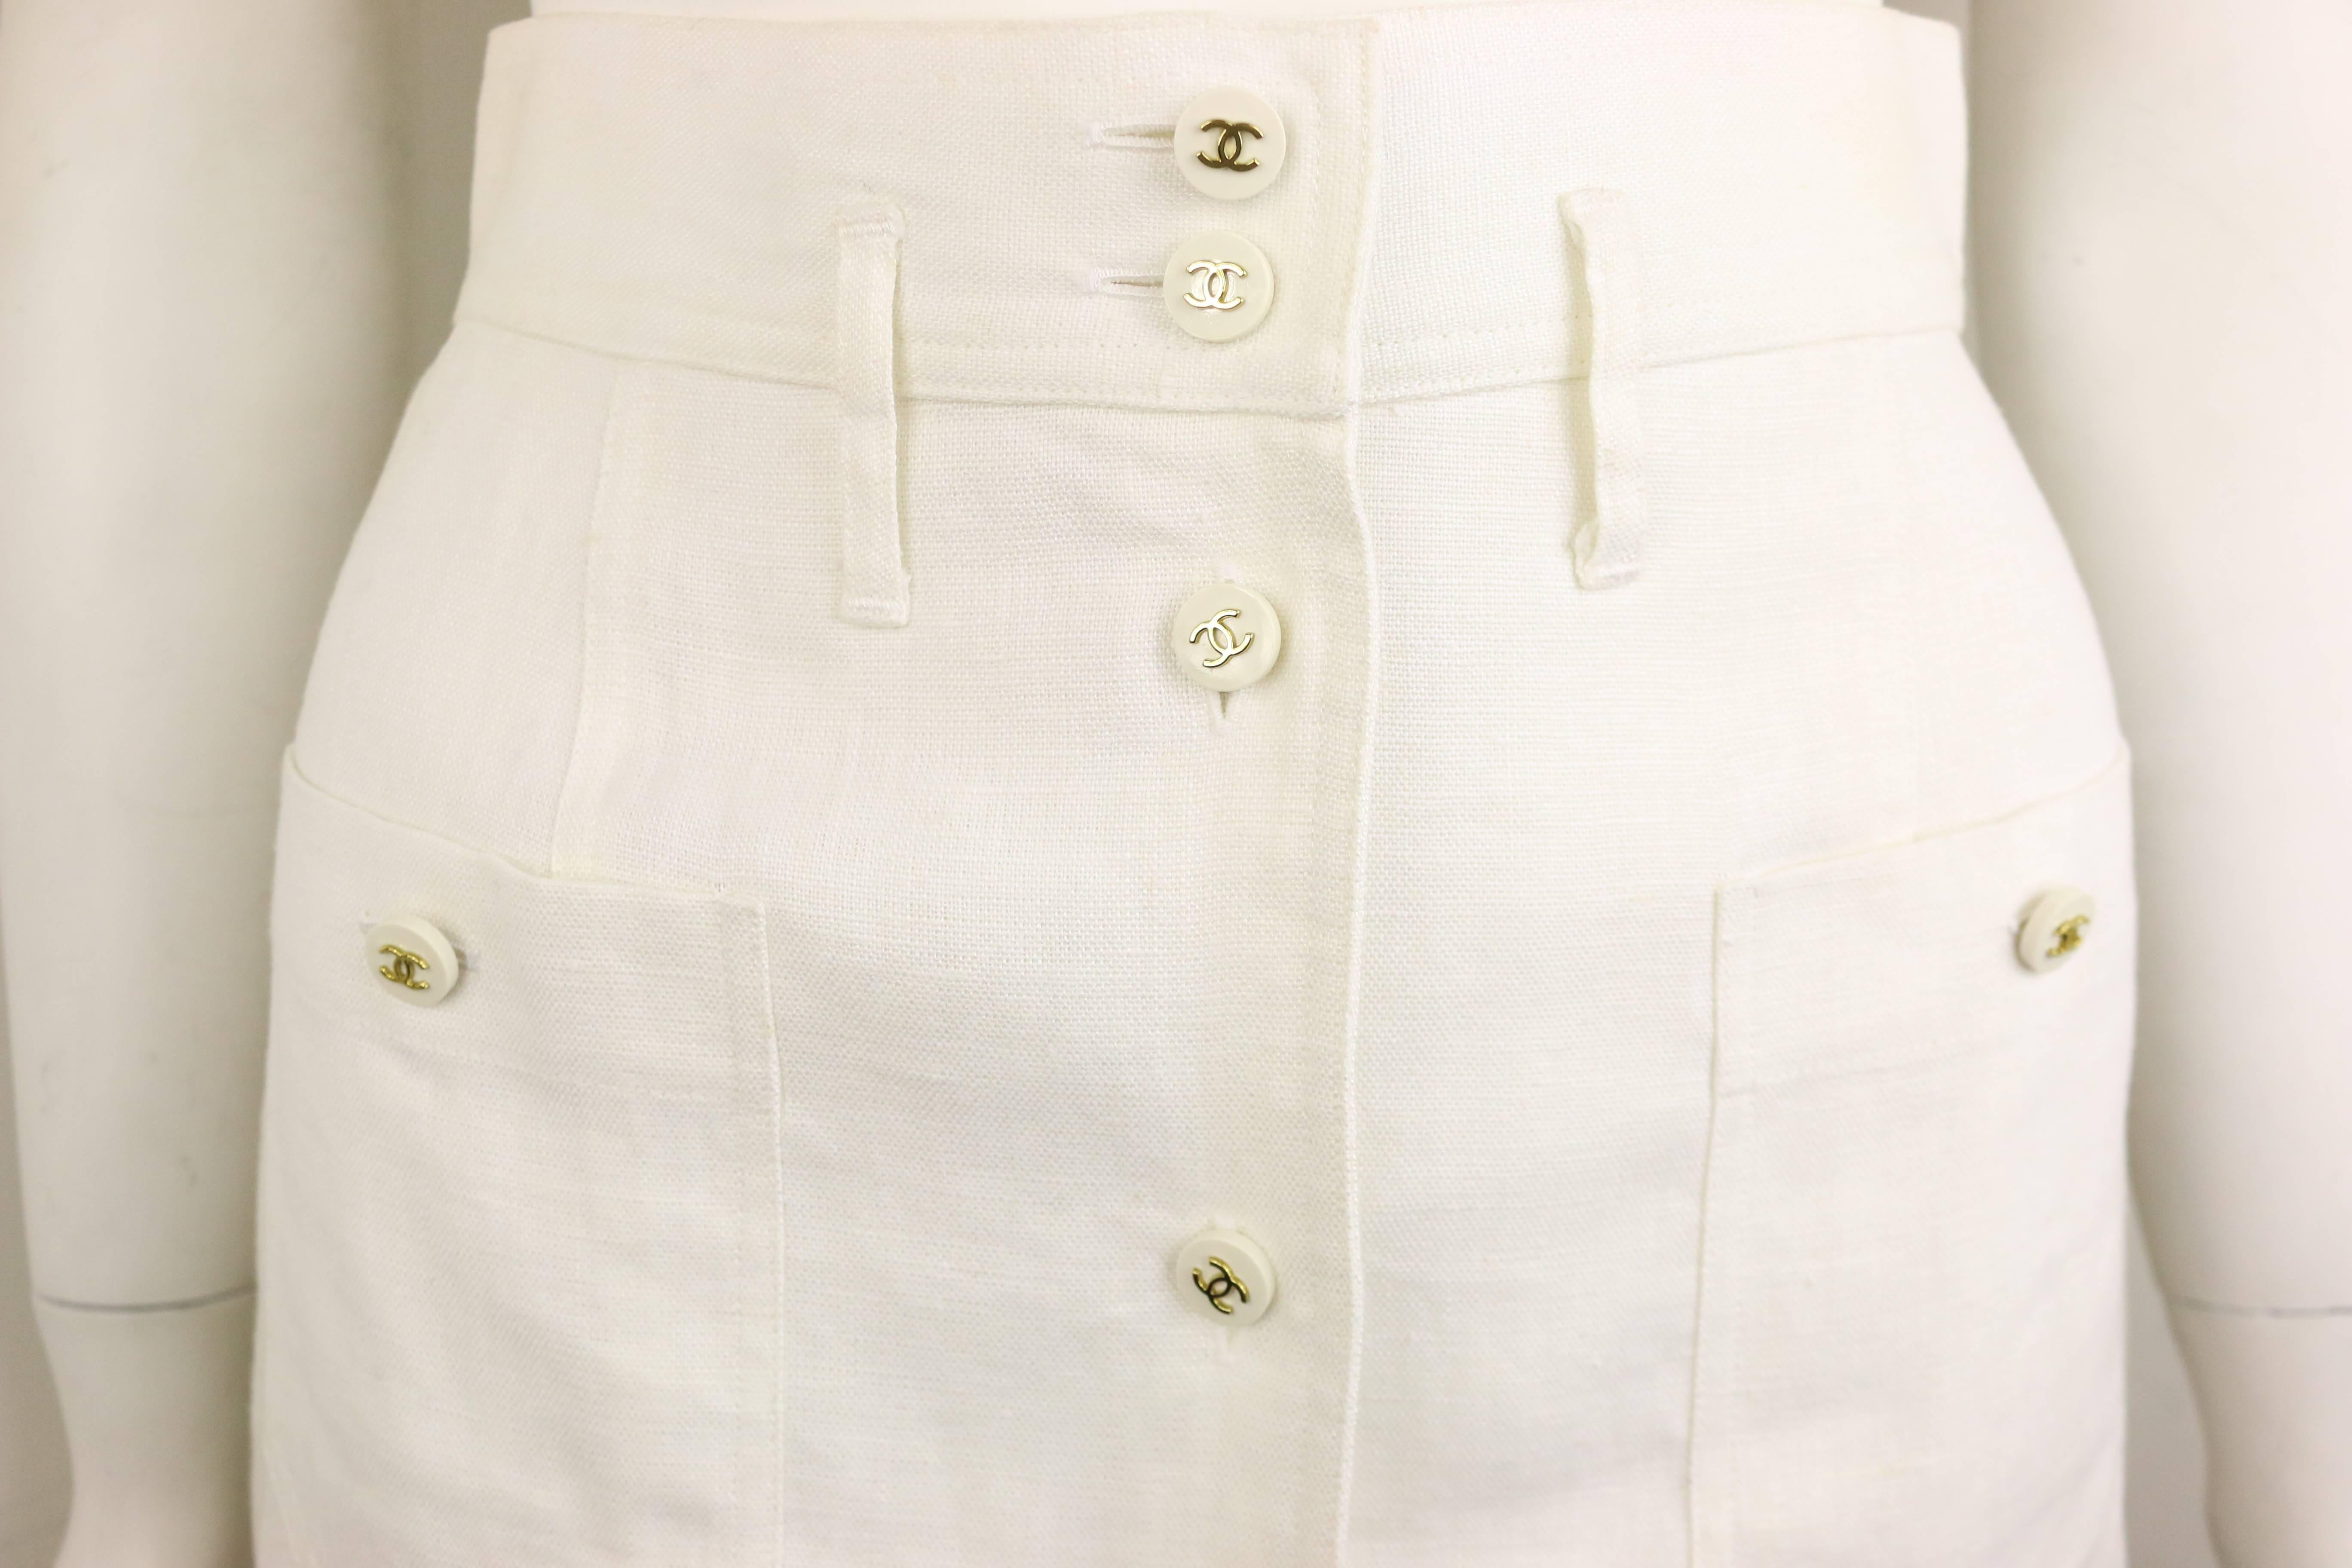 - Vintage 90s Chanel classic white linen skirt. 

- Featuring white gold-toned 